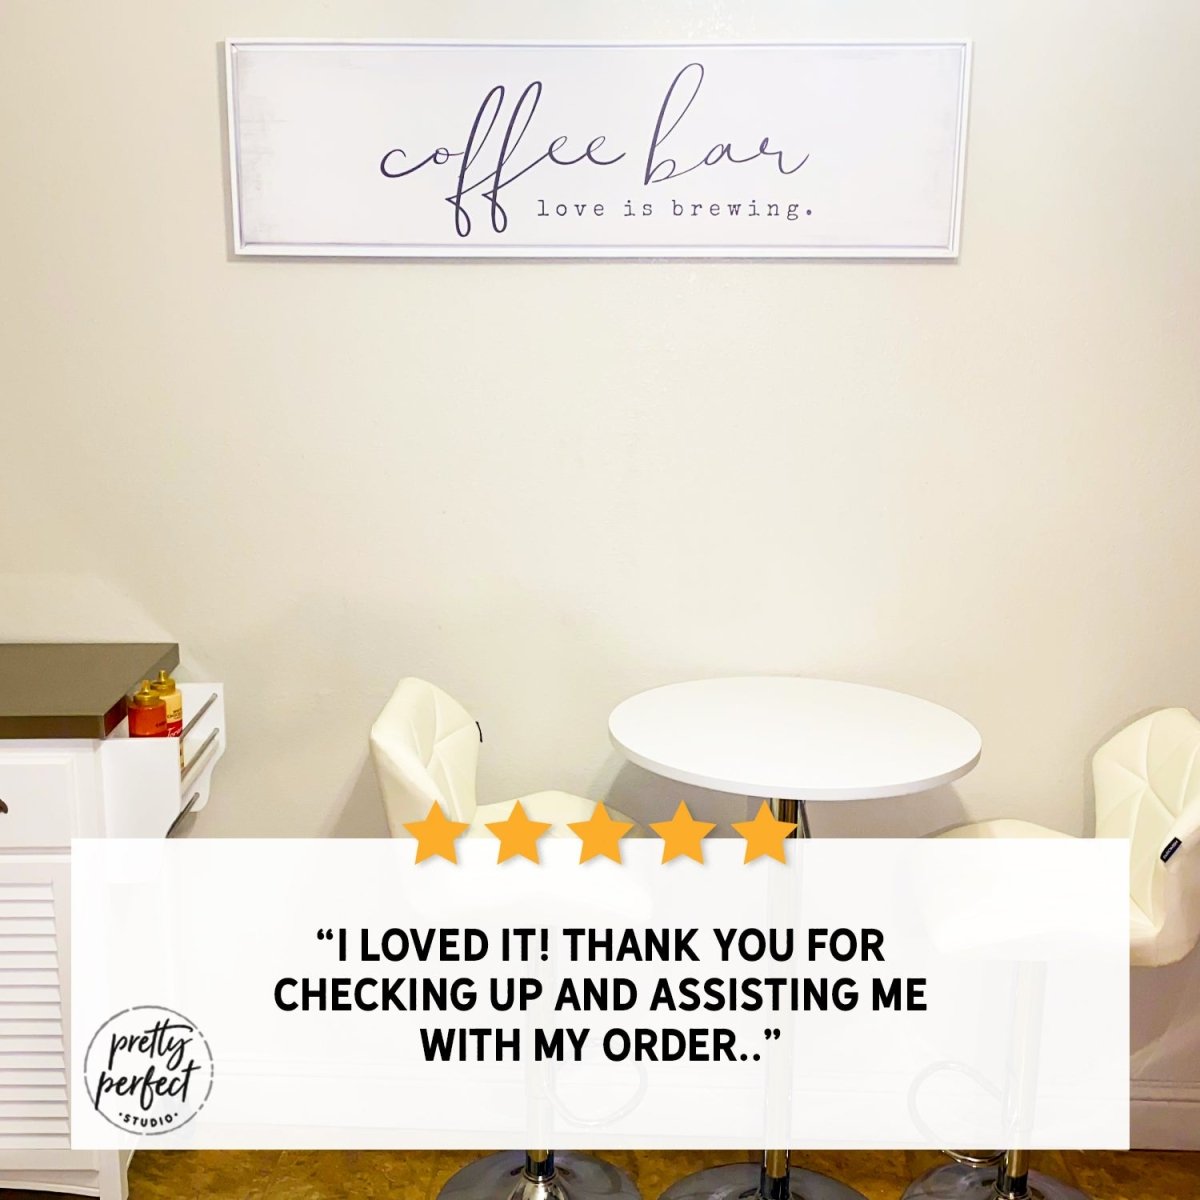 Customer product review for coffee bar love is brewing sign by Pretty Perfect Studio